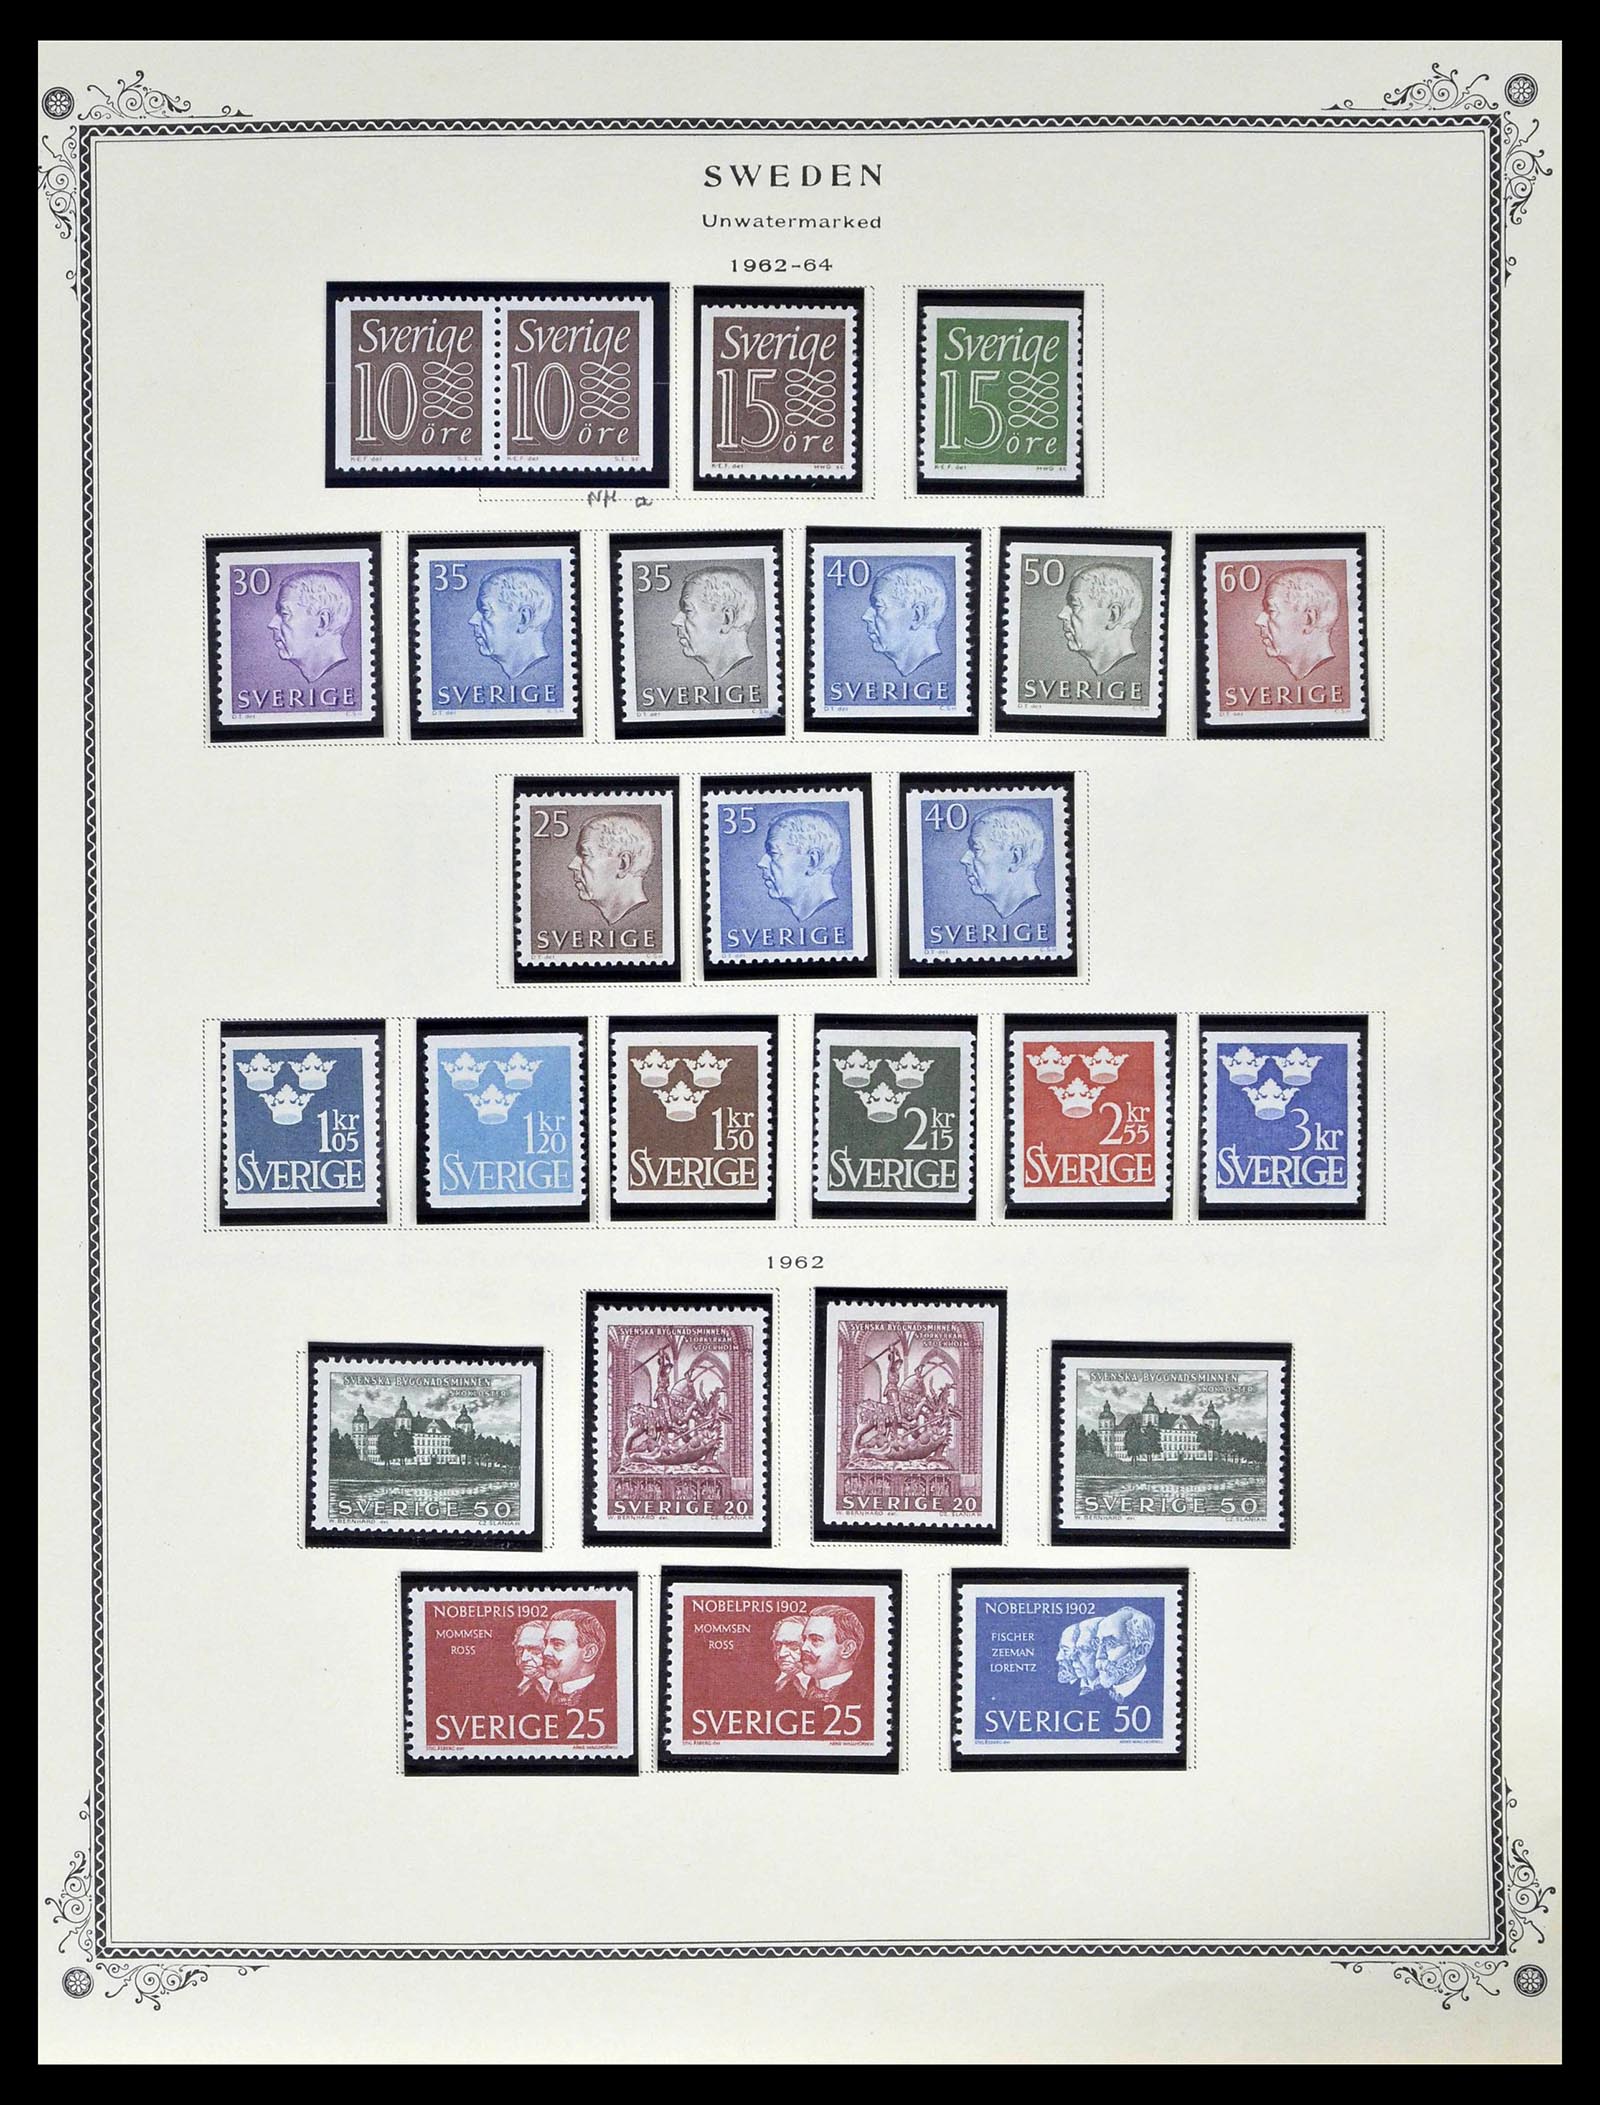 39179 0057 - Stamp collection 39179 Sweden 1855-1997.